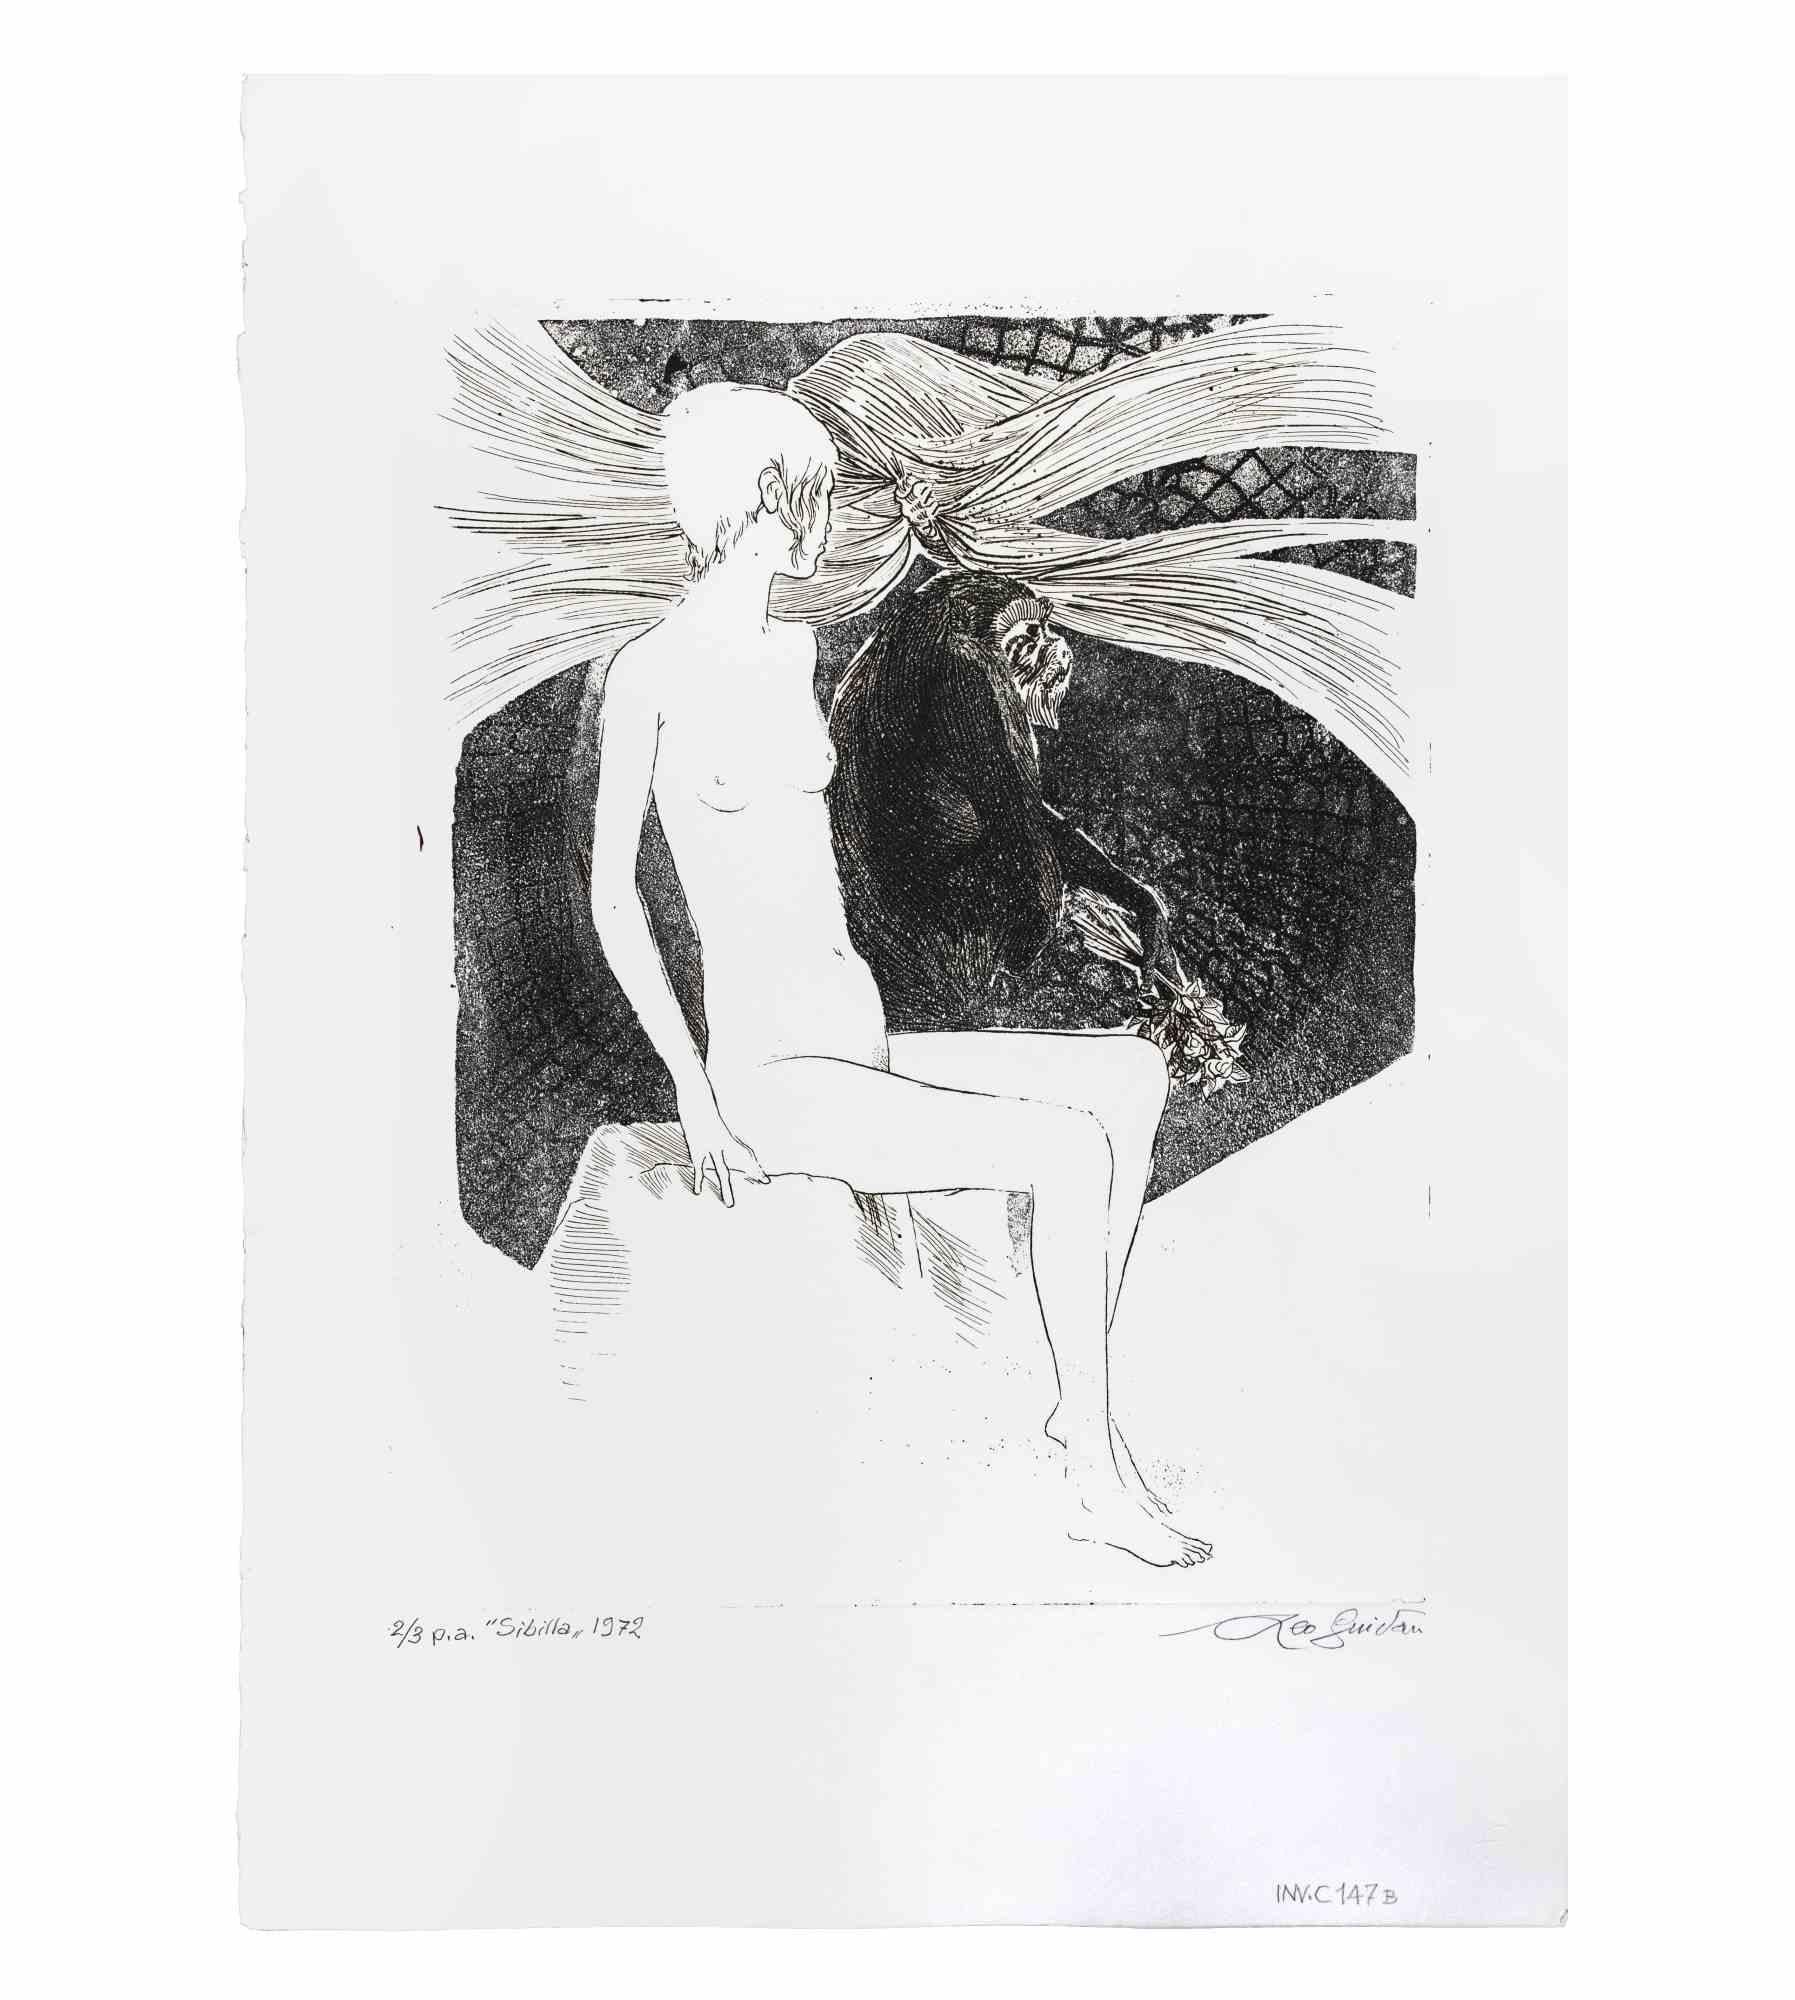 Sibilla Sibilla (Sibyl) is an artwork realized by the italian Contemporary artist  Leo Guida (1992 - 2017) in 1975s.

Original black and white etching on paper.

Hand Signed on the lower right margin.Titled, dated and numbered, ex. 2/3 p.a., on the